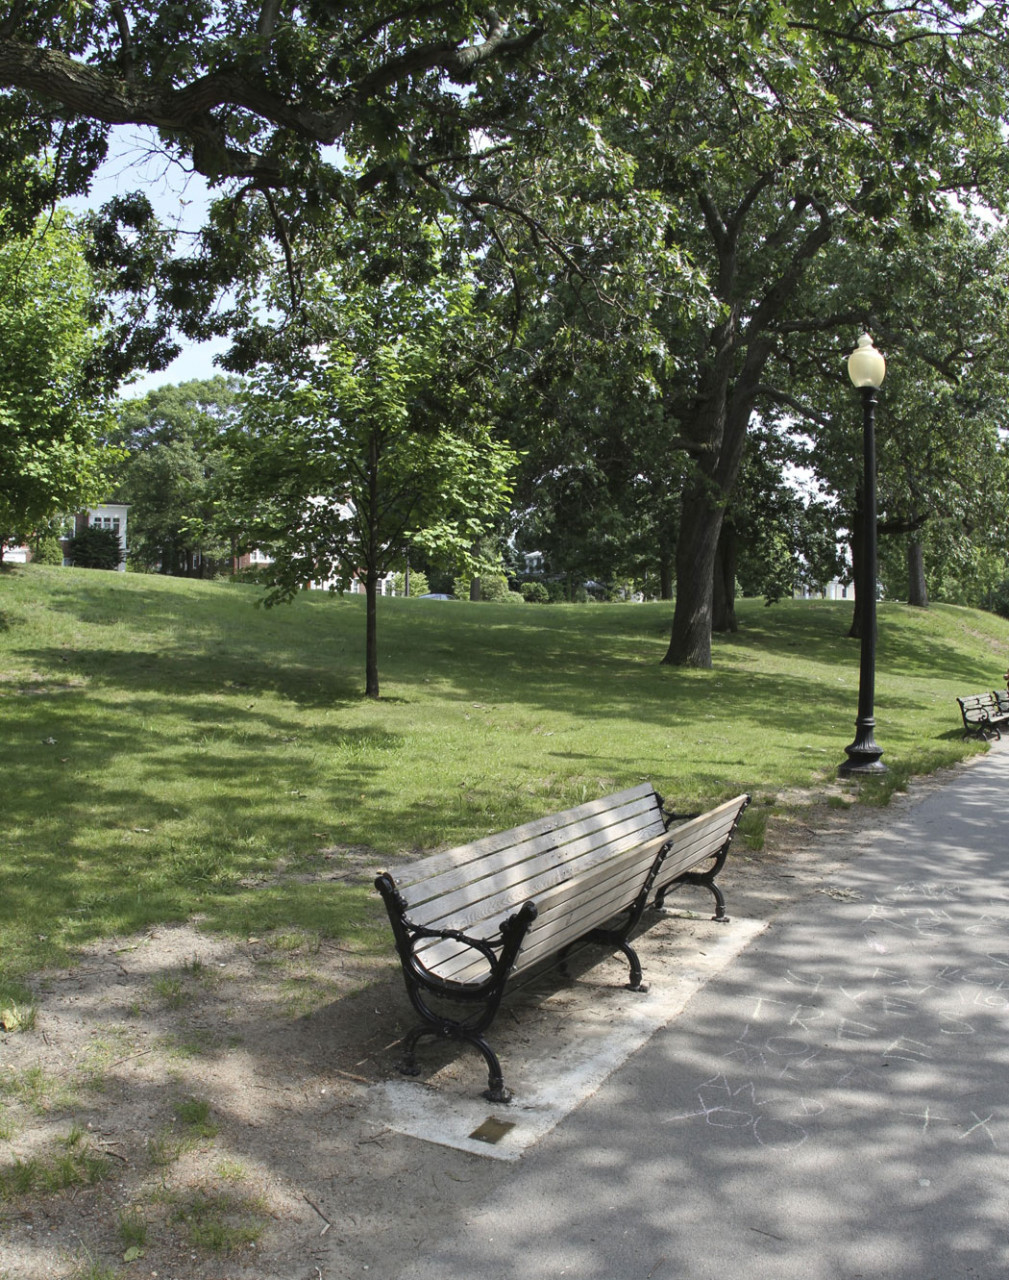 The curious bench Matthew Hincman snuck into Jamaica Pond in 2006. (Courtesy)